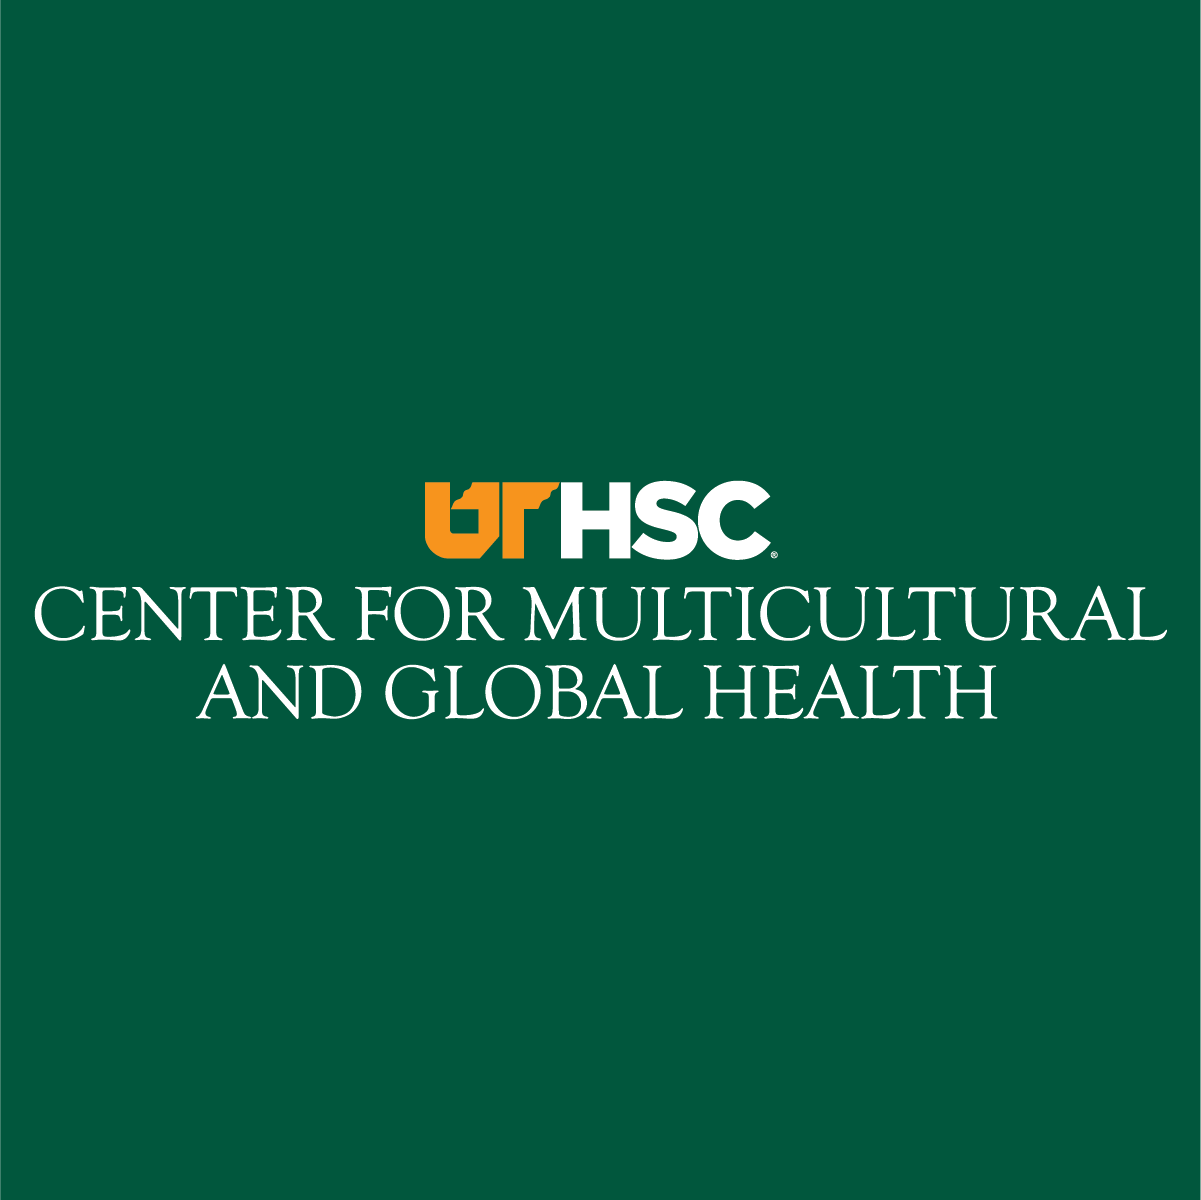 UTHSC Hosts Inaugural Multicultural and Global Health Symposium Nov. 6